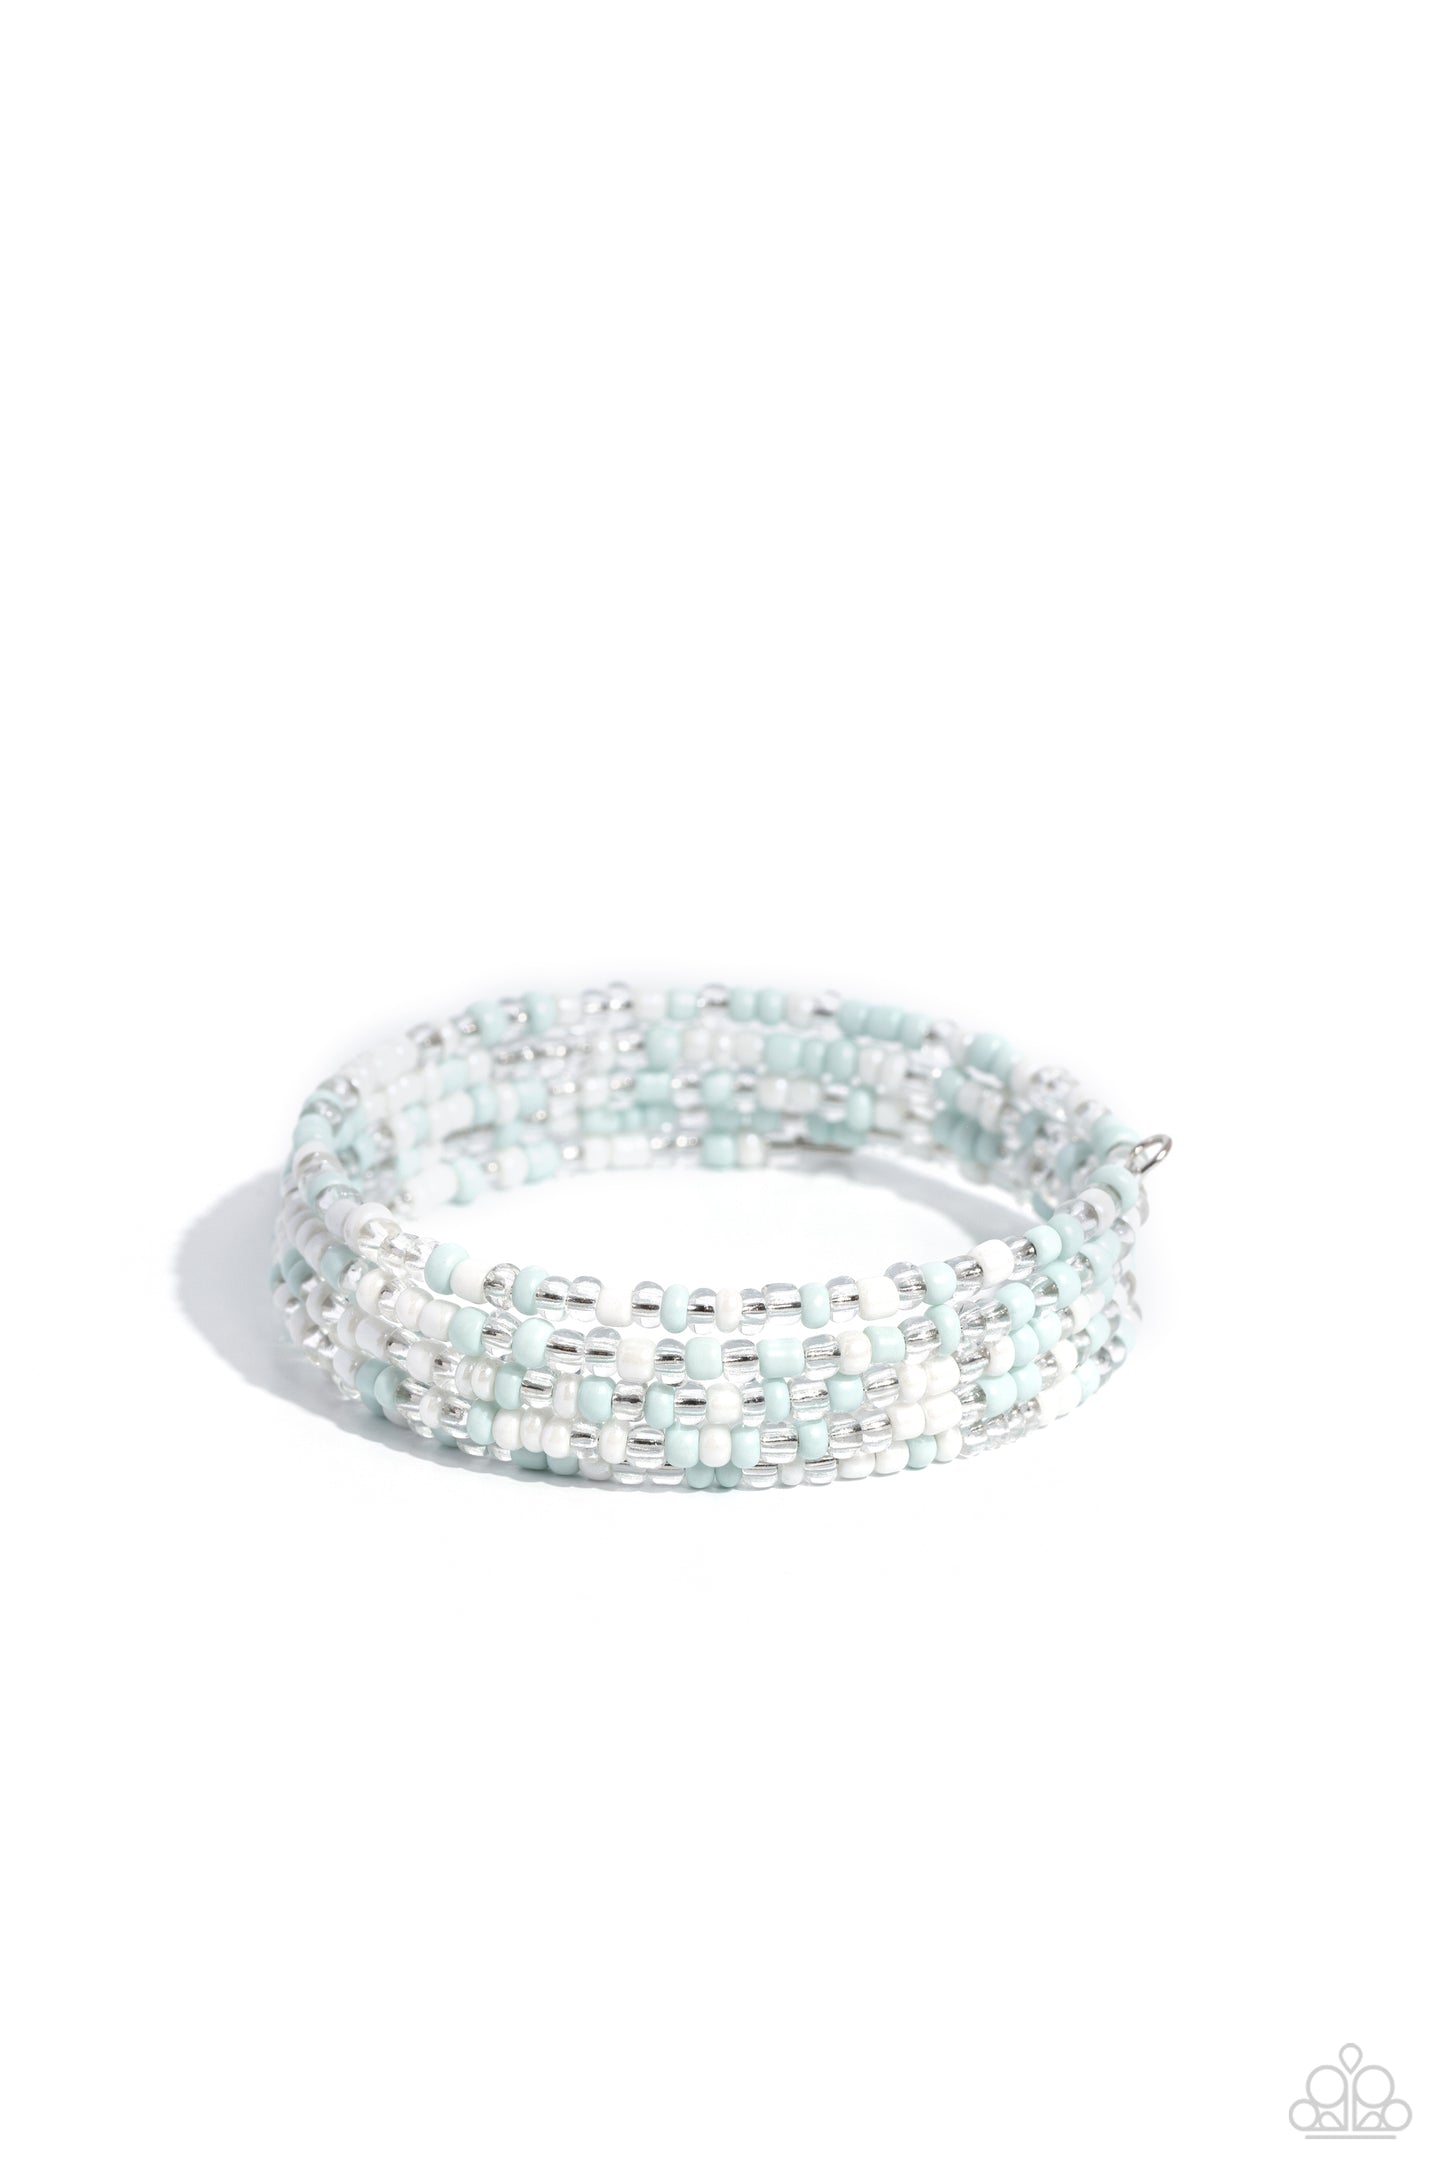 Coiled Candy White Coil Bracelet - Paparazzi Accessories  Row after row of pearly white, clear, and light blue seed beads coil around the wrist, creating a charismatic infinity wrap style bracelet.  Sold as one individual bracelet.  P9SE-WTXX-258XX